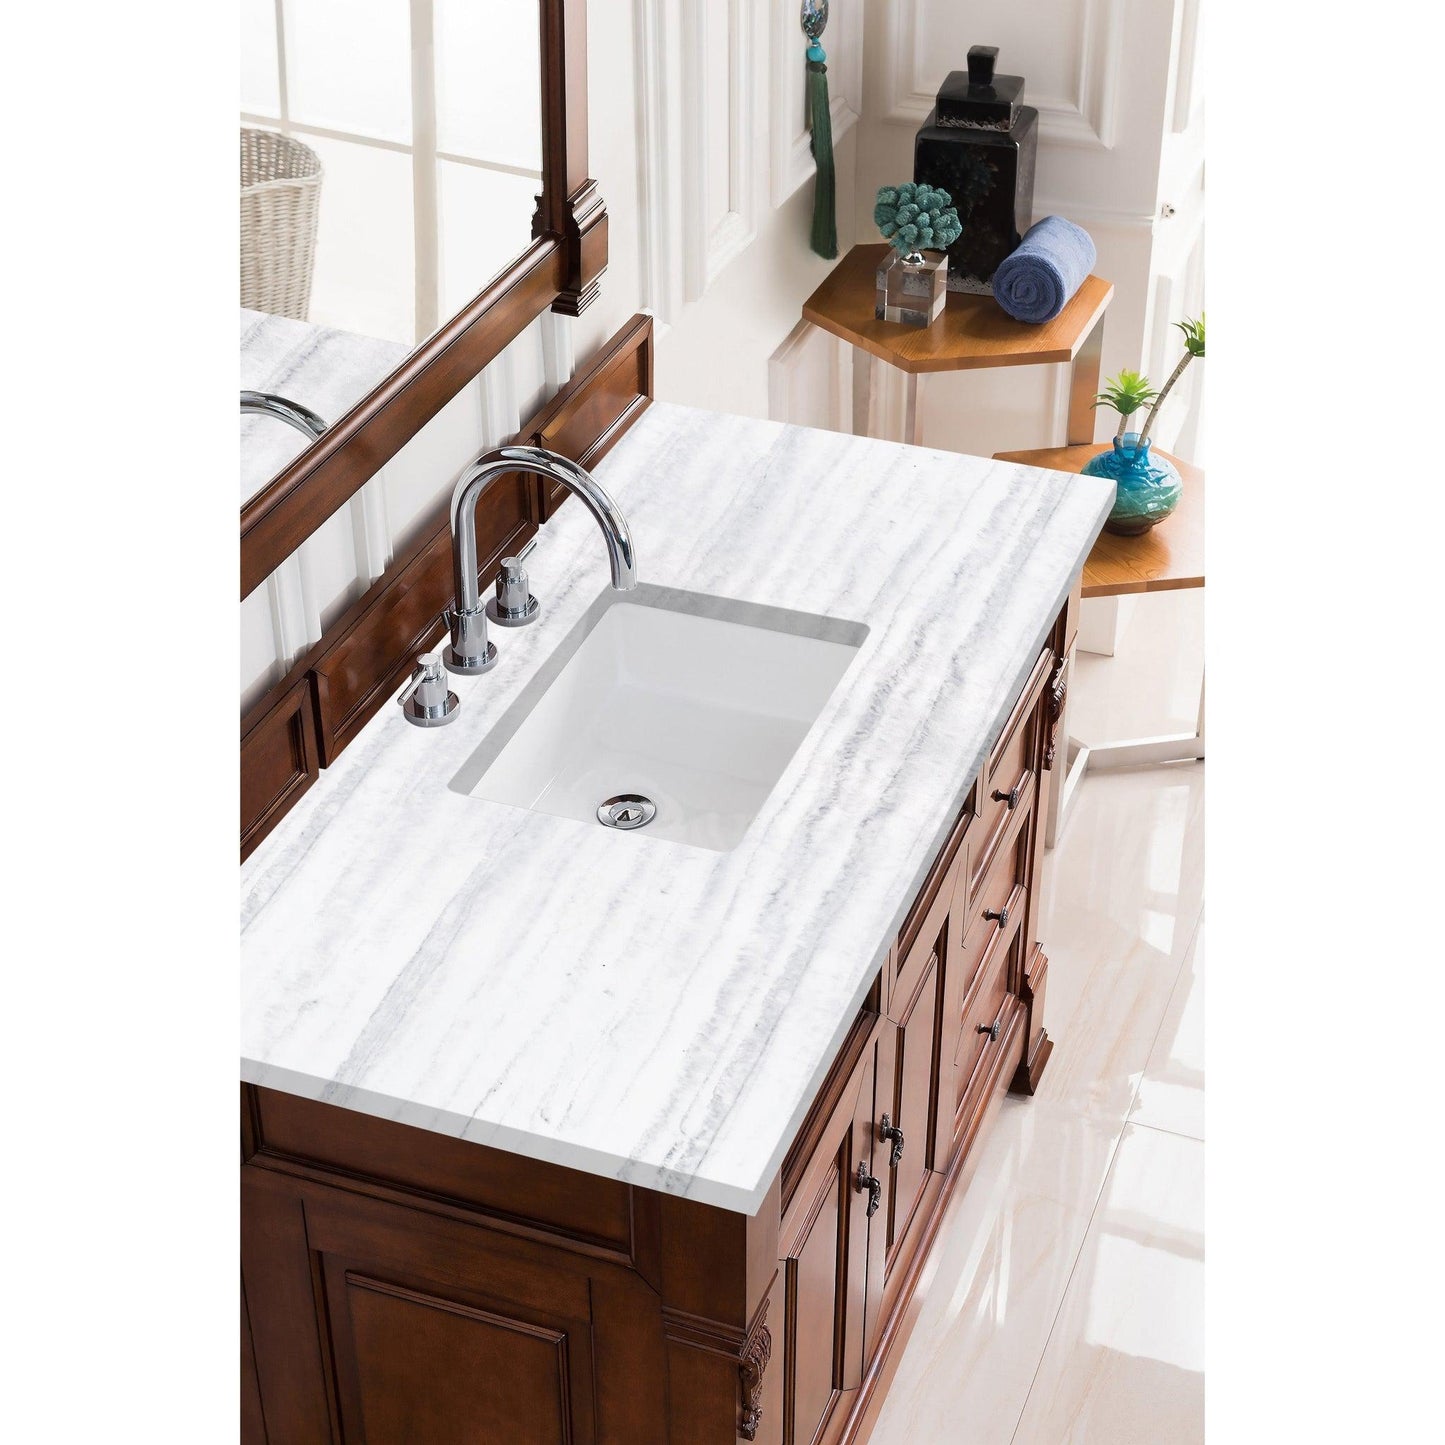 James Martin Vanities Brookfield 48" Warm Cherry Single Vanity With 3cm Arctic Fall Solid Surface Top